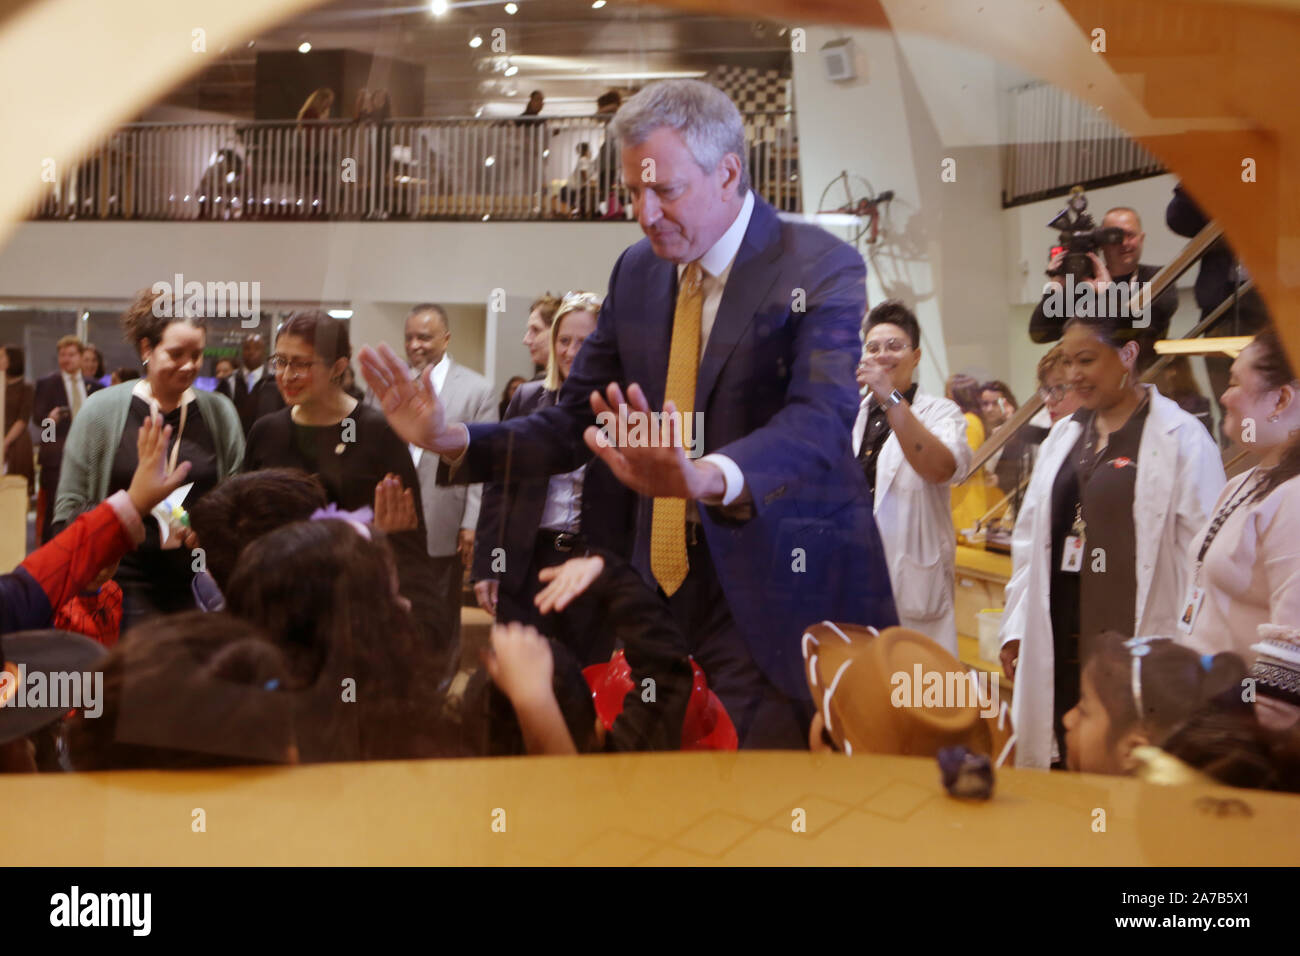 Queens, New York, USA. 31st Oct, 2019. New York City Mayor Bill De Blasio along with New York City School Chancellor Richard A. Carranza, Queens Borough President Melinda Katz, New York State Senator Jessica Ramon, Assembly Member Jeff Aubry, New York City Council Member Francisco Maya amongst others attend the press conference to announce the start of construction of the new 306 seat STEAM Pre-K Center in Corona, Queens held at the New York Hall of Science on October 31, 2019 in New York City. Credit: Mpi43/Media Punch/Alamy Live News Stock Photo